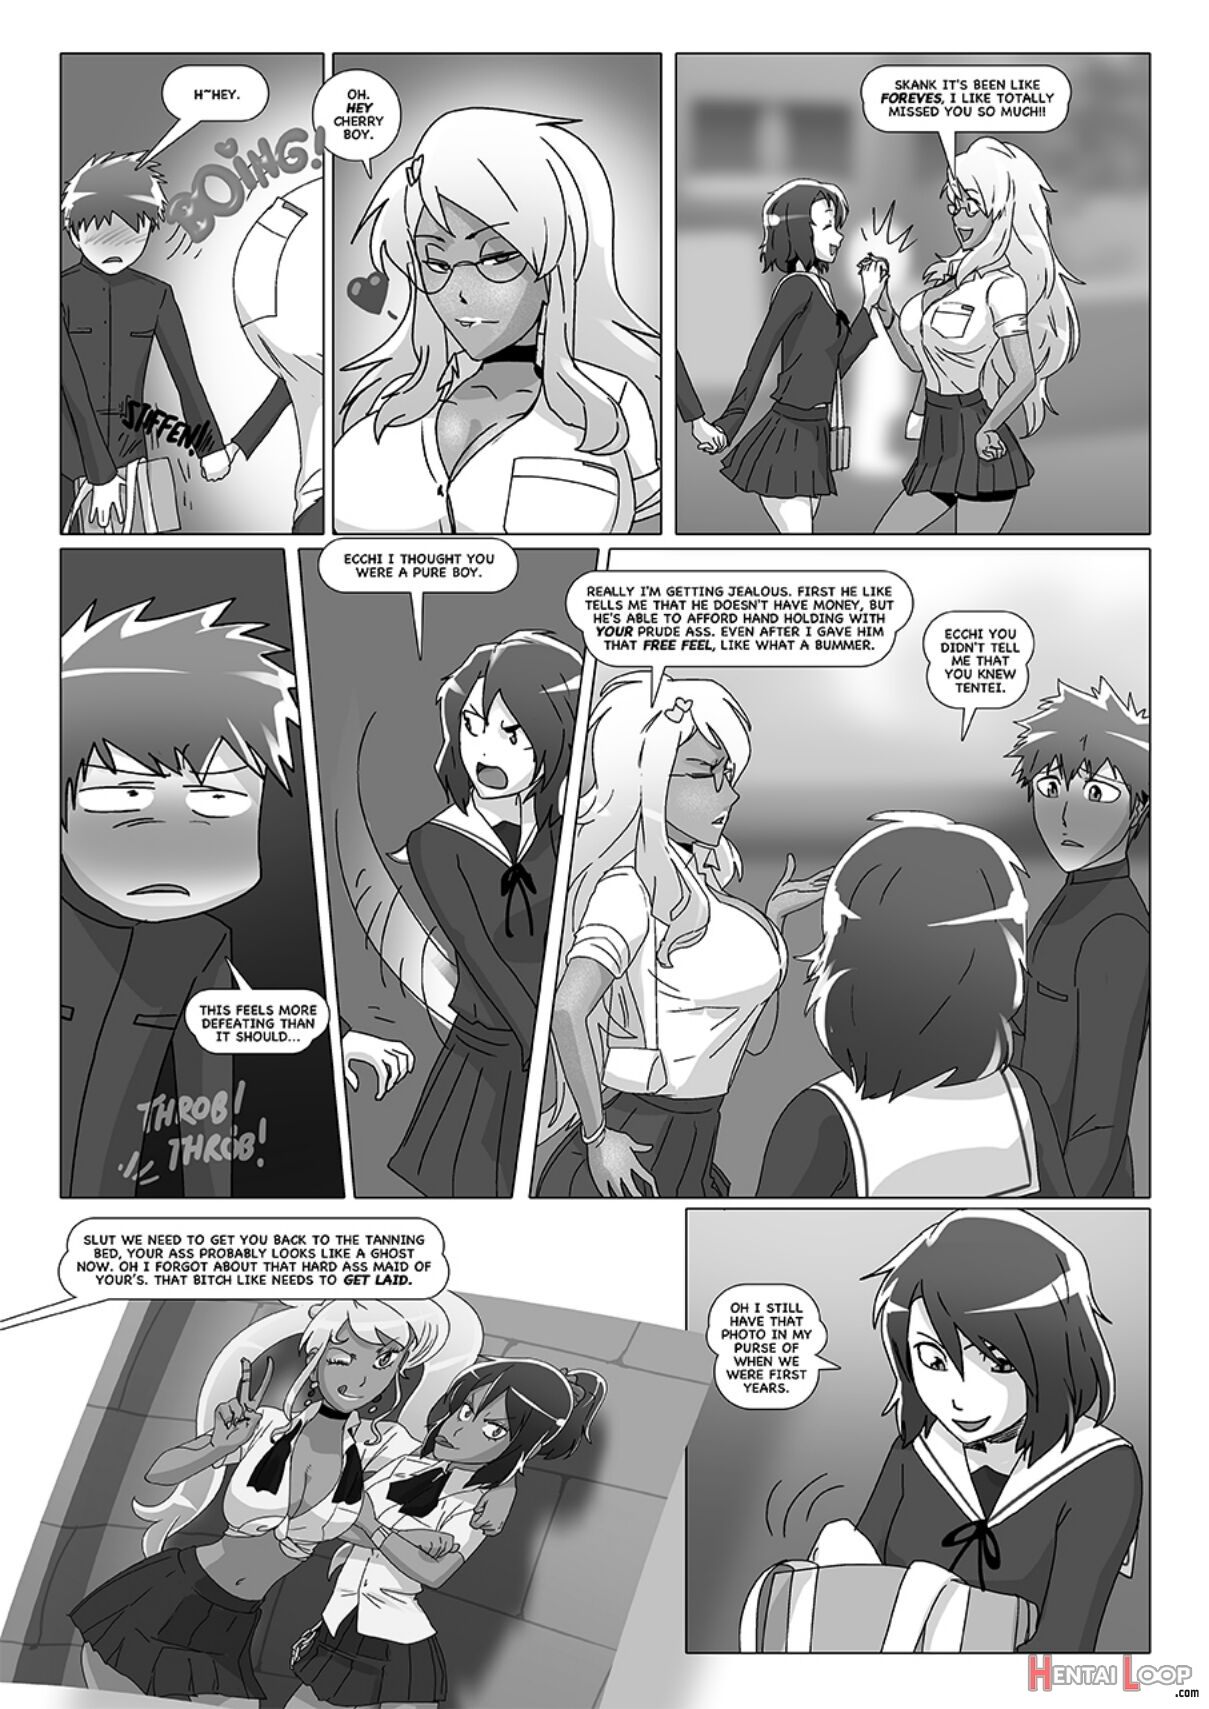 Happy To Serve You - Xxx Version page 413